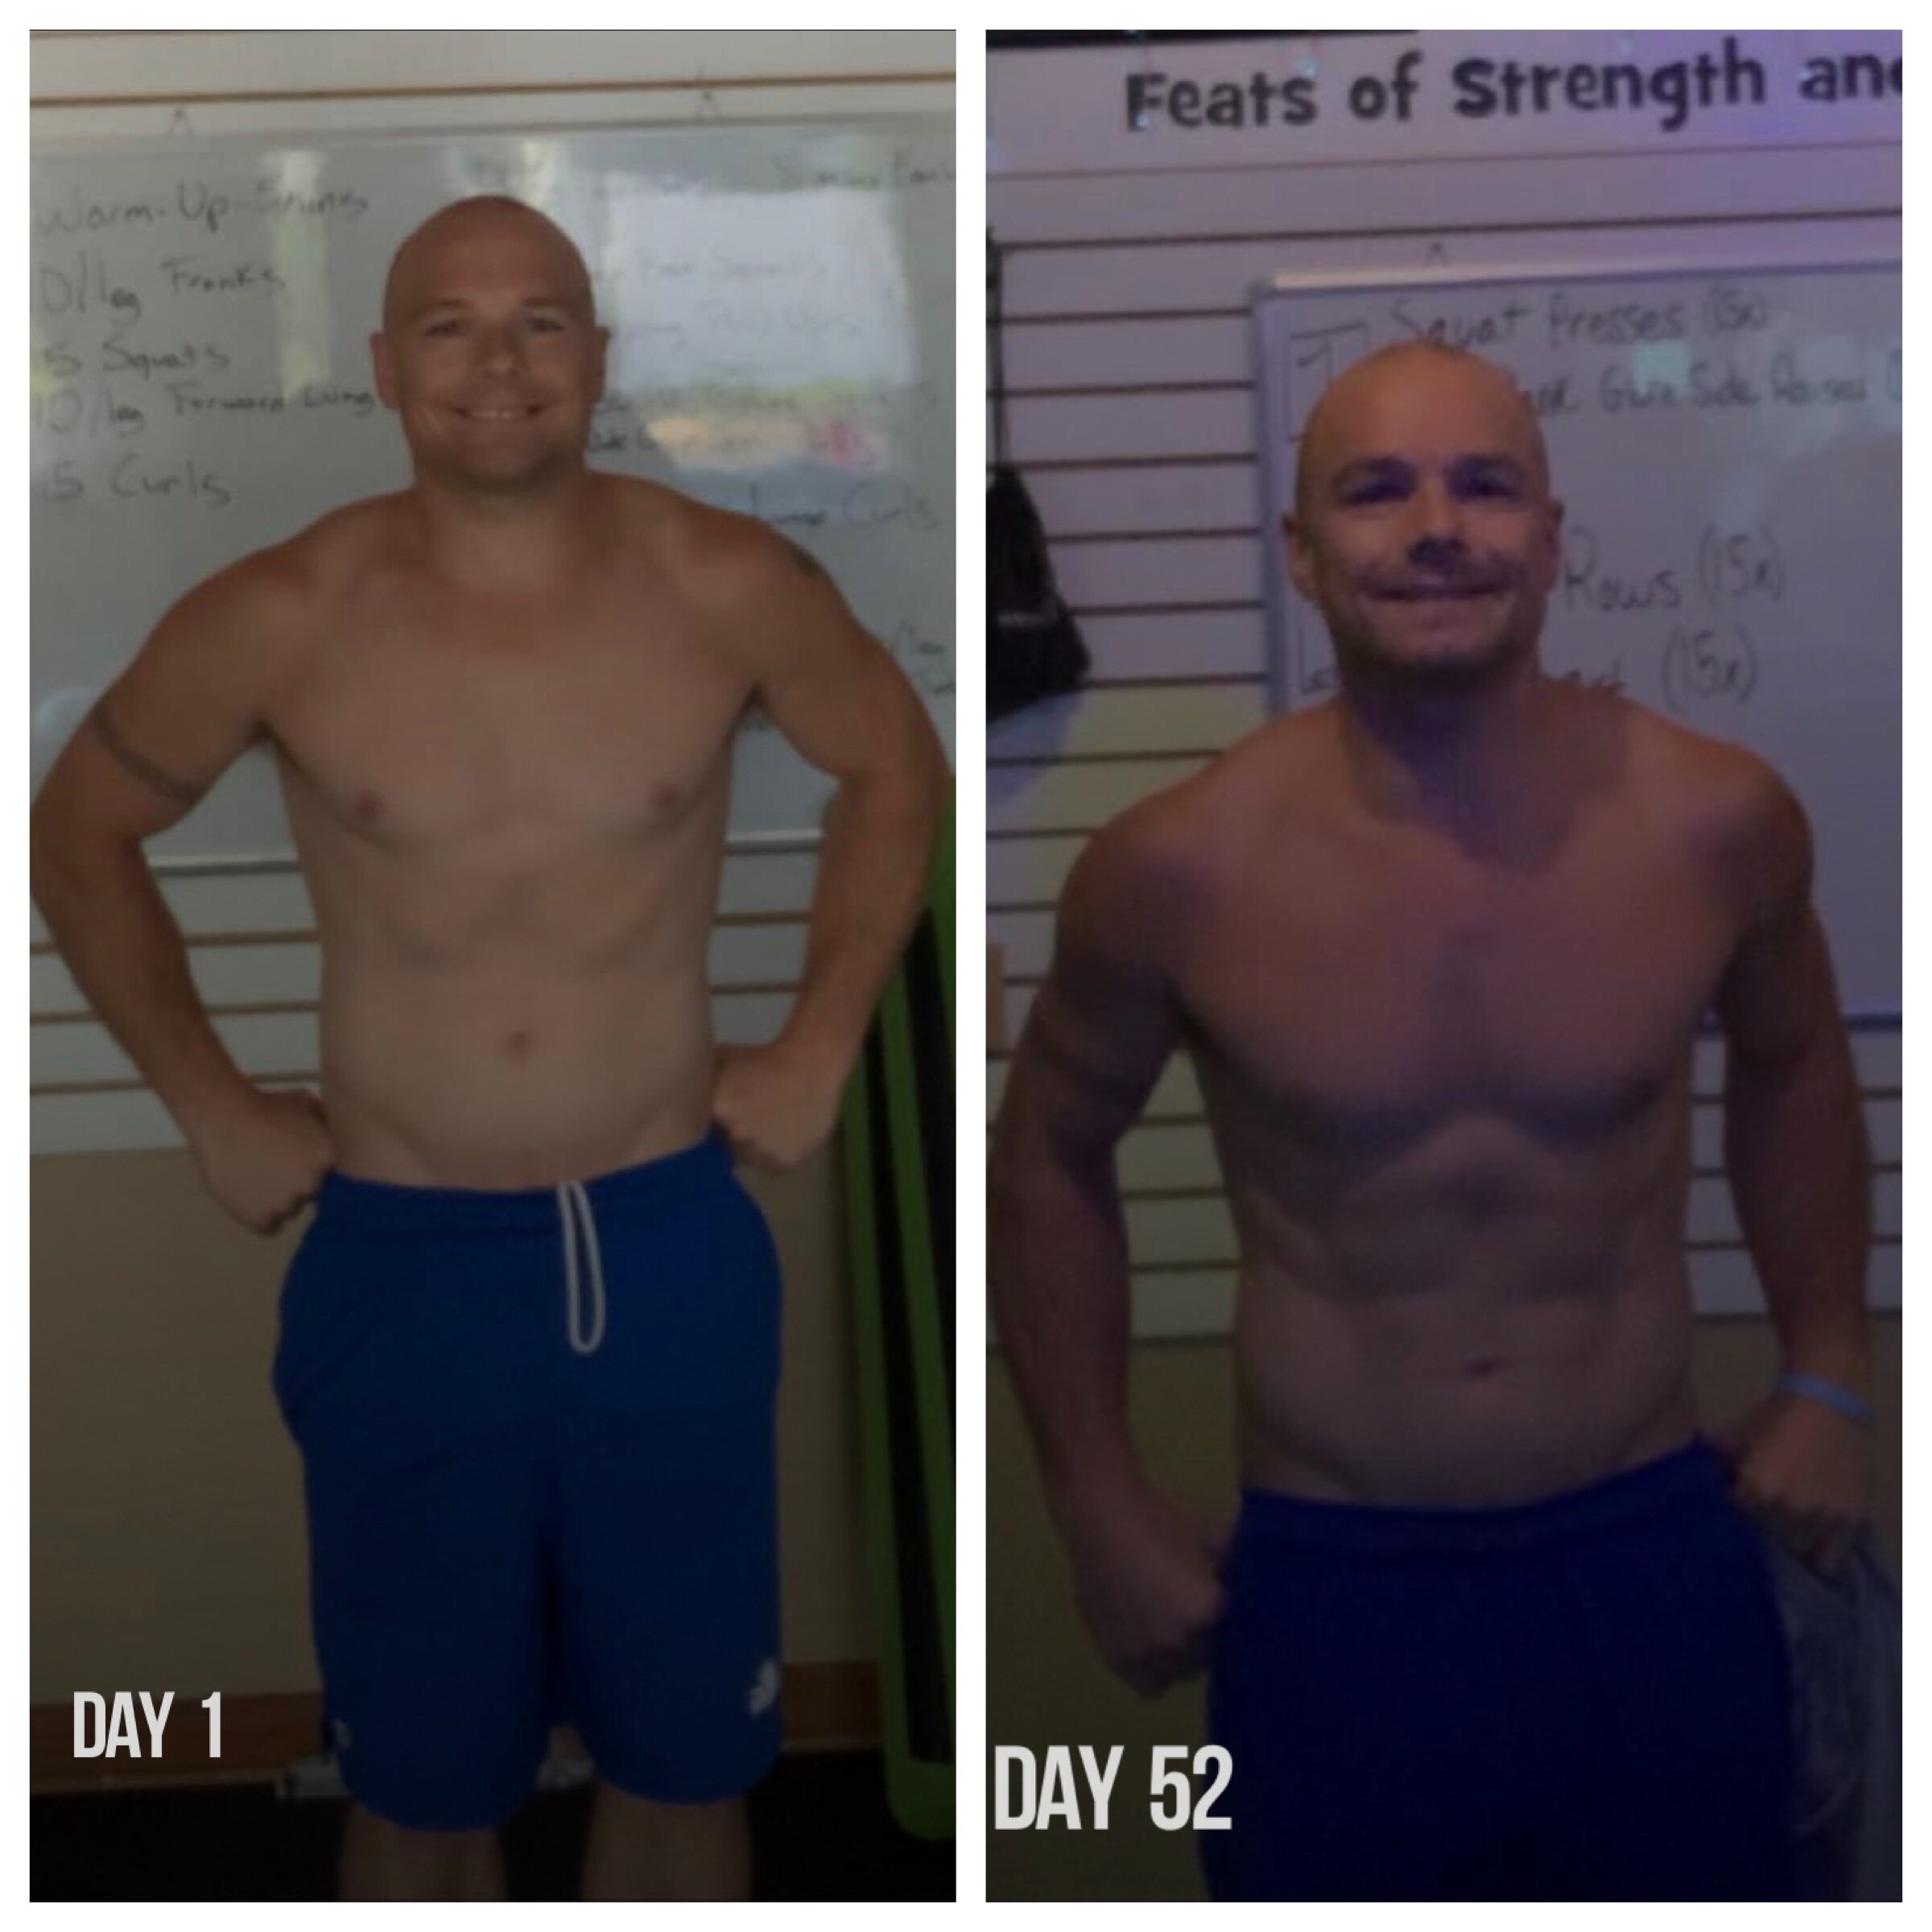 Intermittent Fasting has been a big reason for my 10 pounds of weight loss! I highly recommend it for its effectiveness, and because the method has been proven to have real health benefits.